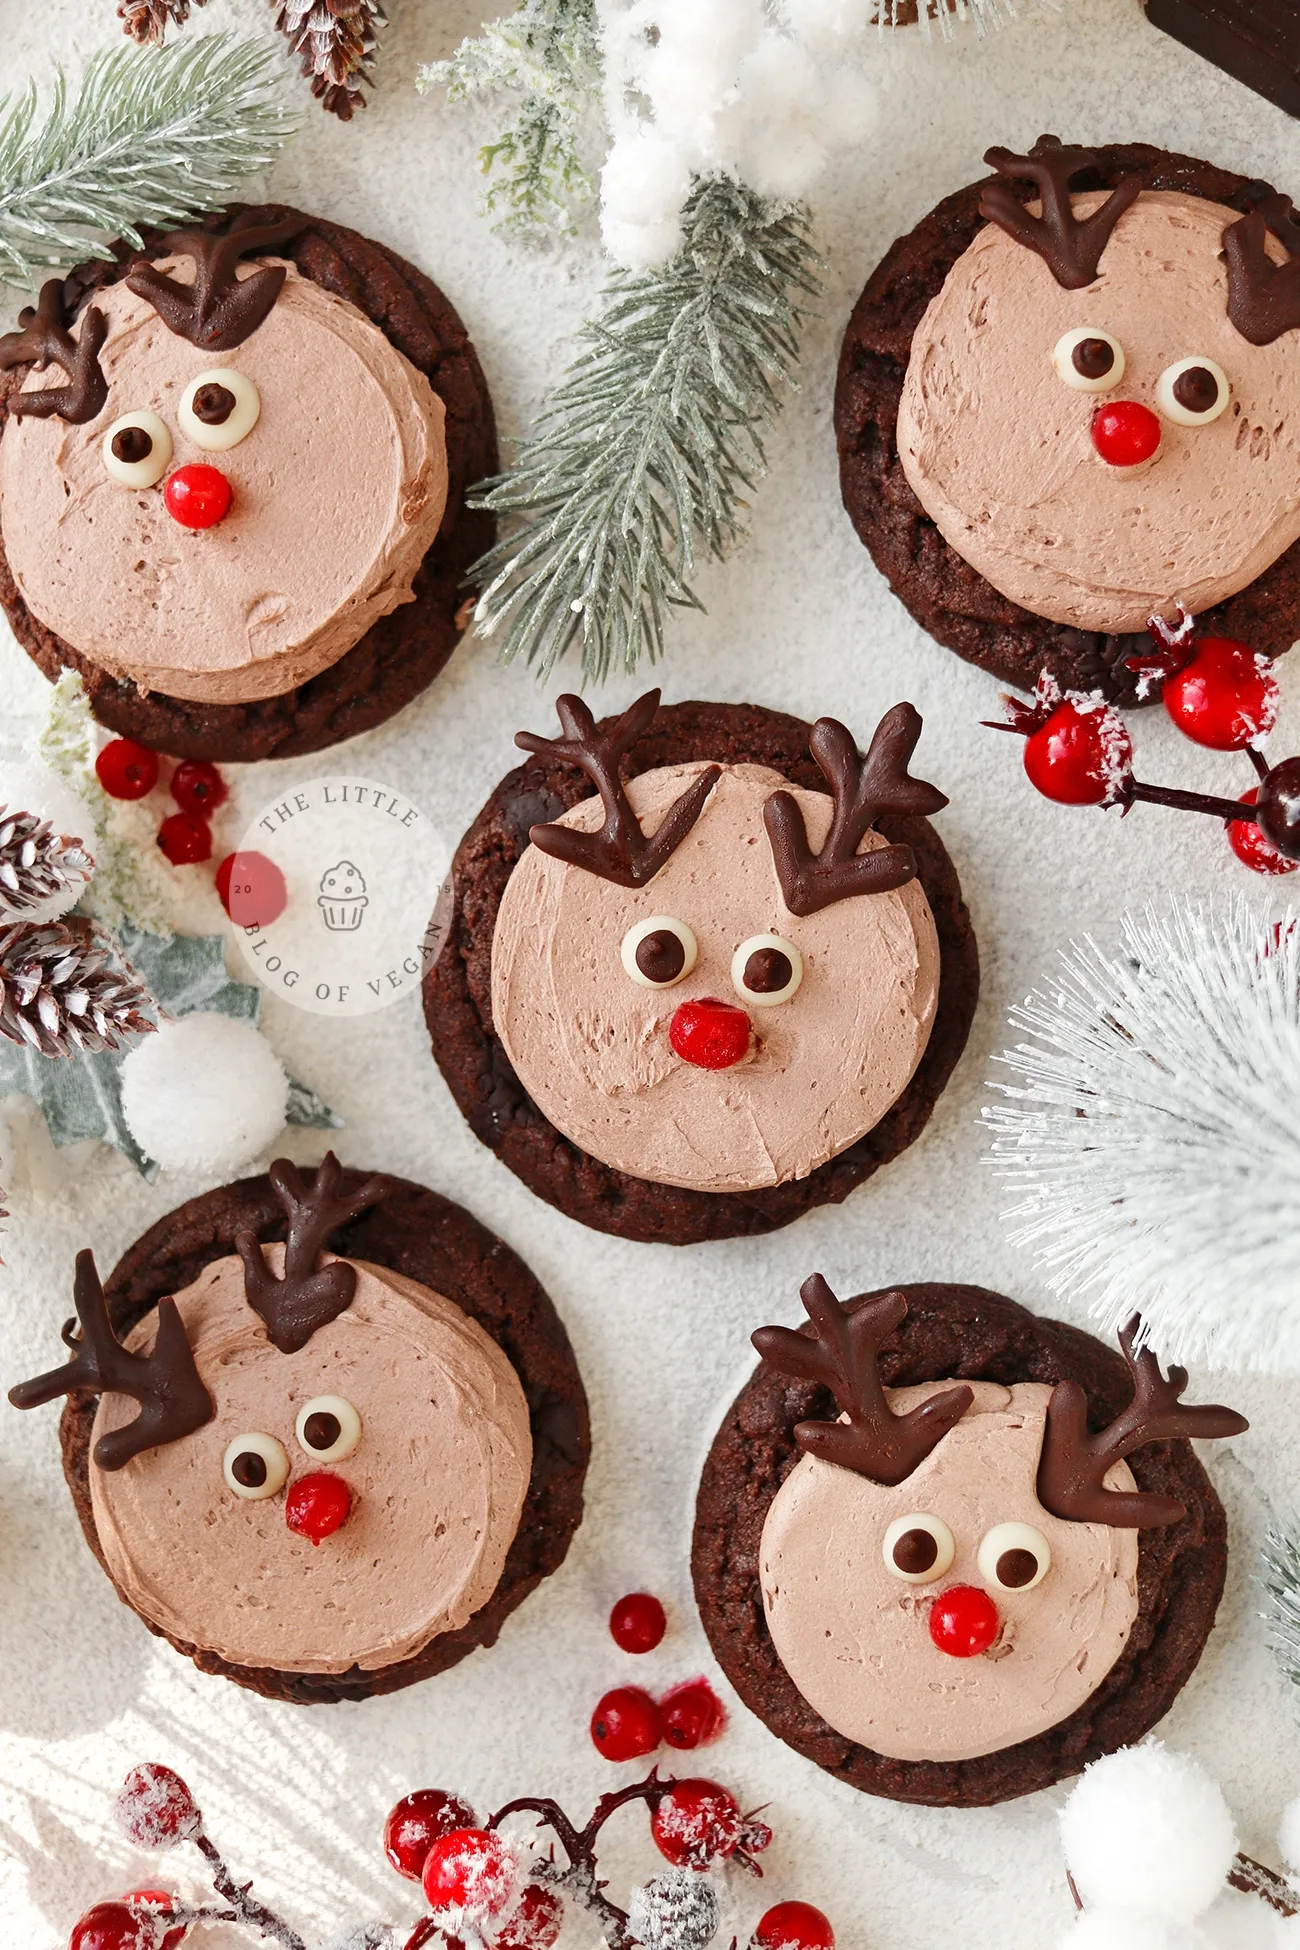 Reindeer face-shaped chocolate cookies with red noses.